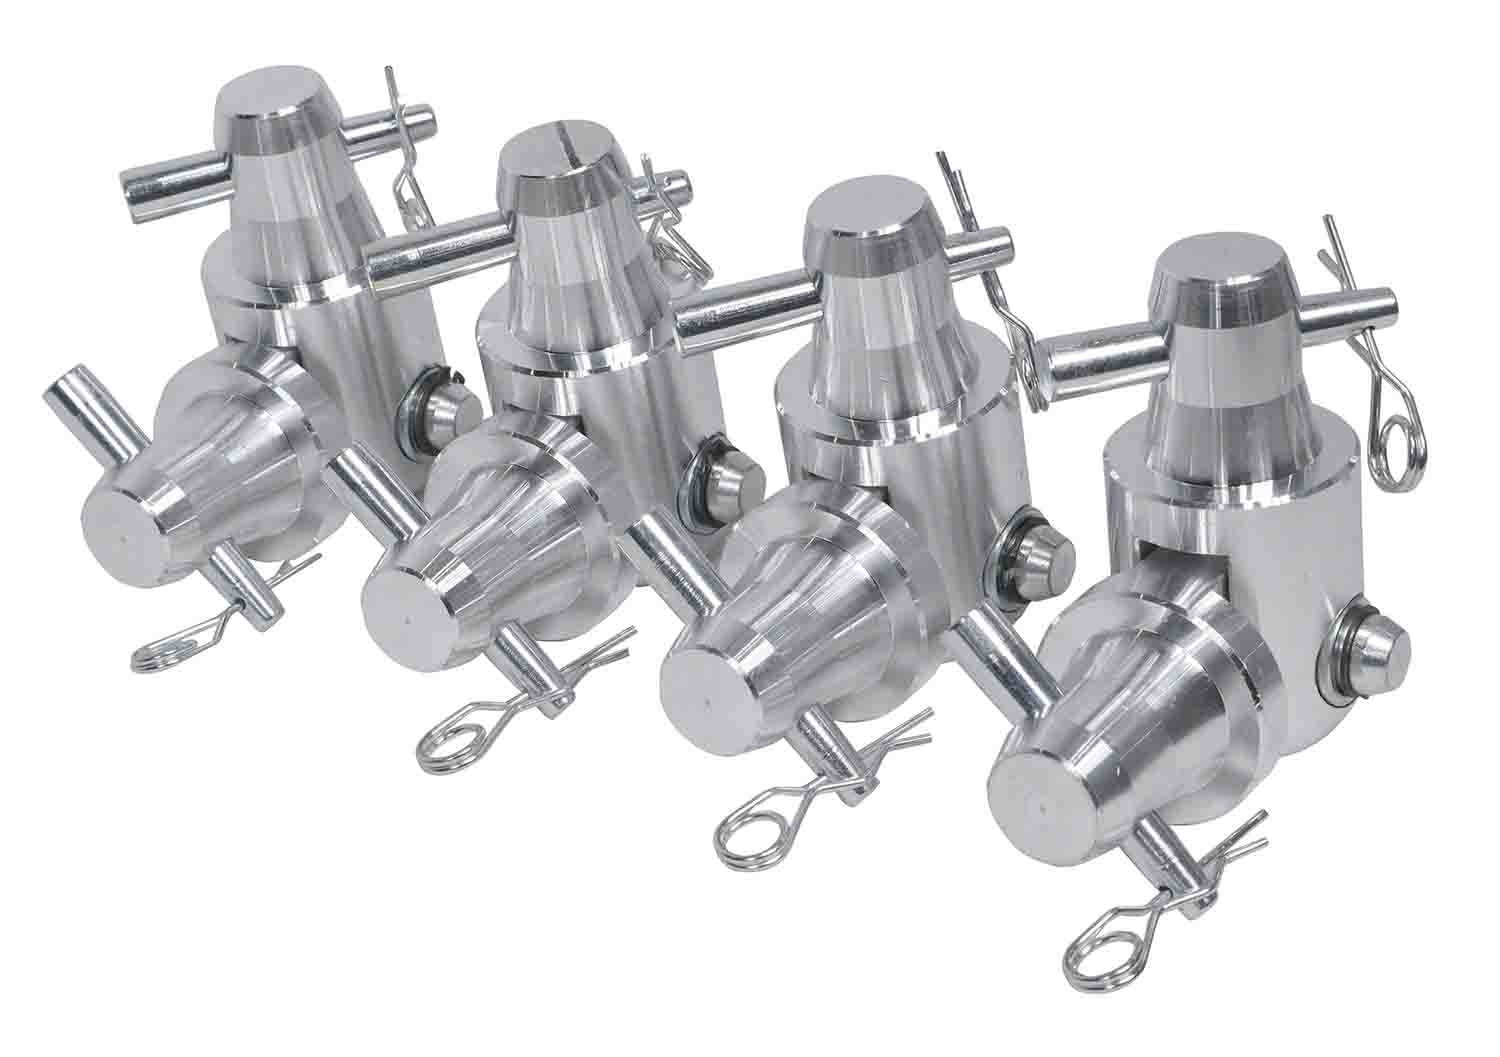 PROX XT-HINGEX4 Pack of 4 Conical Single Tube Hinge Unit for F31 F32 F34 - Hollywood DJ